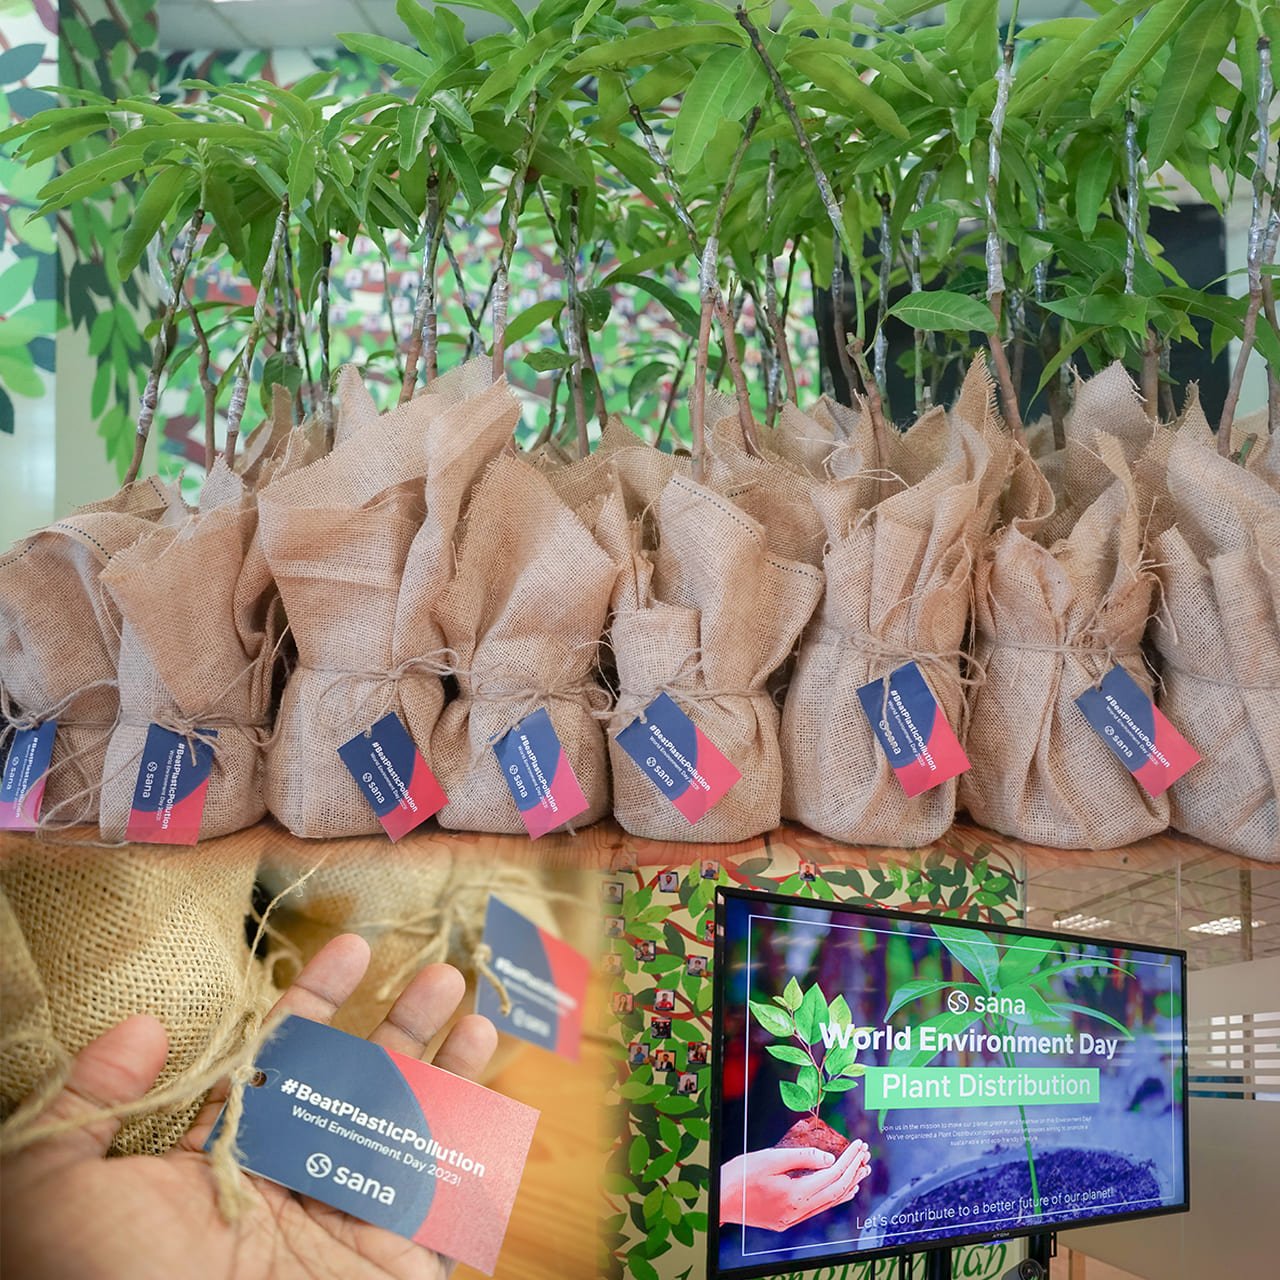 On June 5th, in celebration of World Environment Day, Sana Commerce Sri Lanka organized a plant distribution event at its office premises.